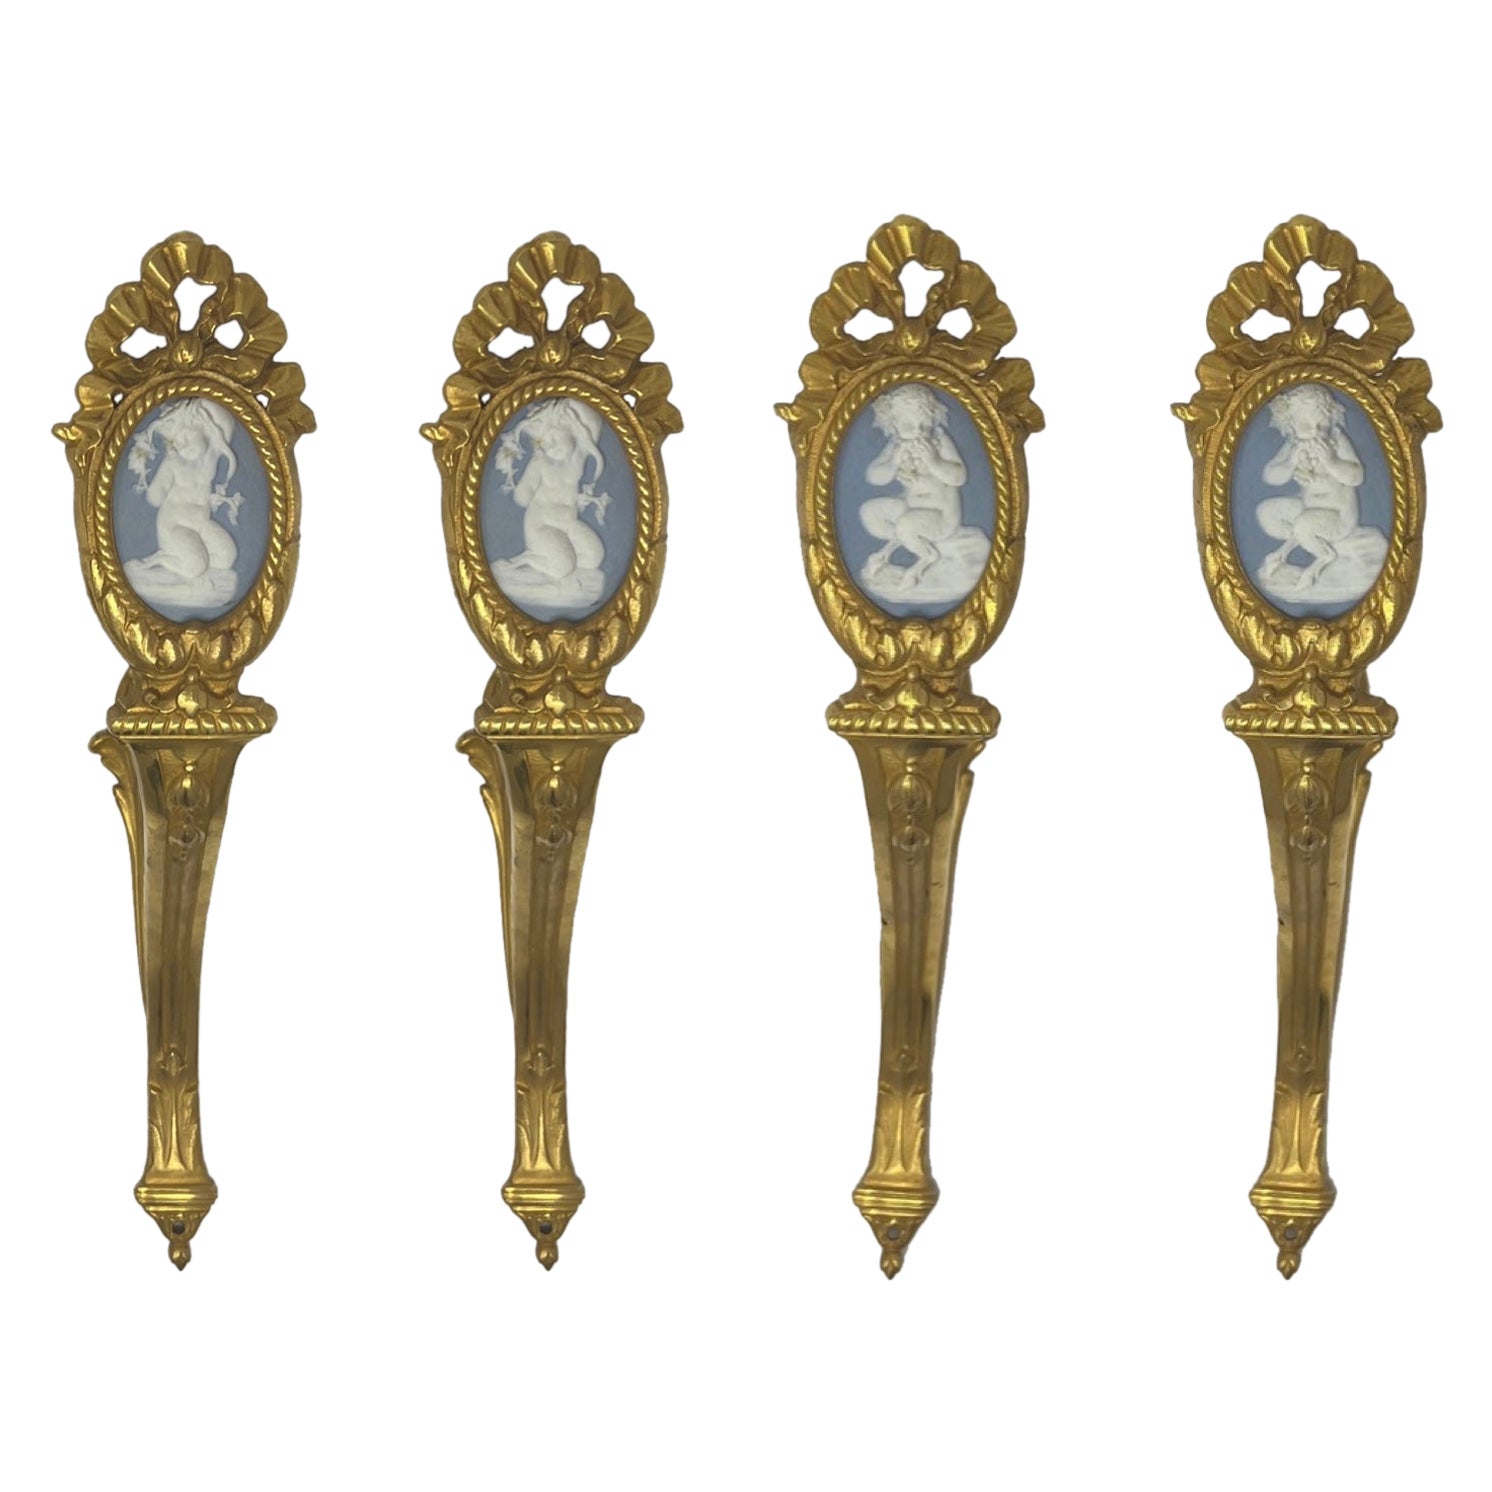 Set of 4 Antique Wedgwood Curtain Ties